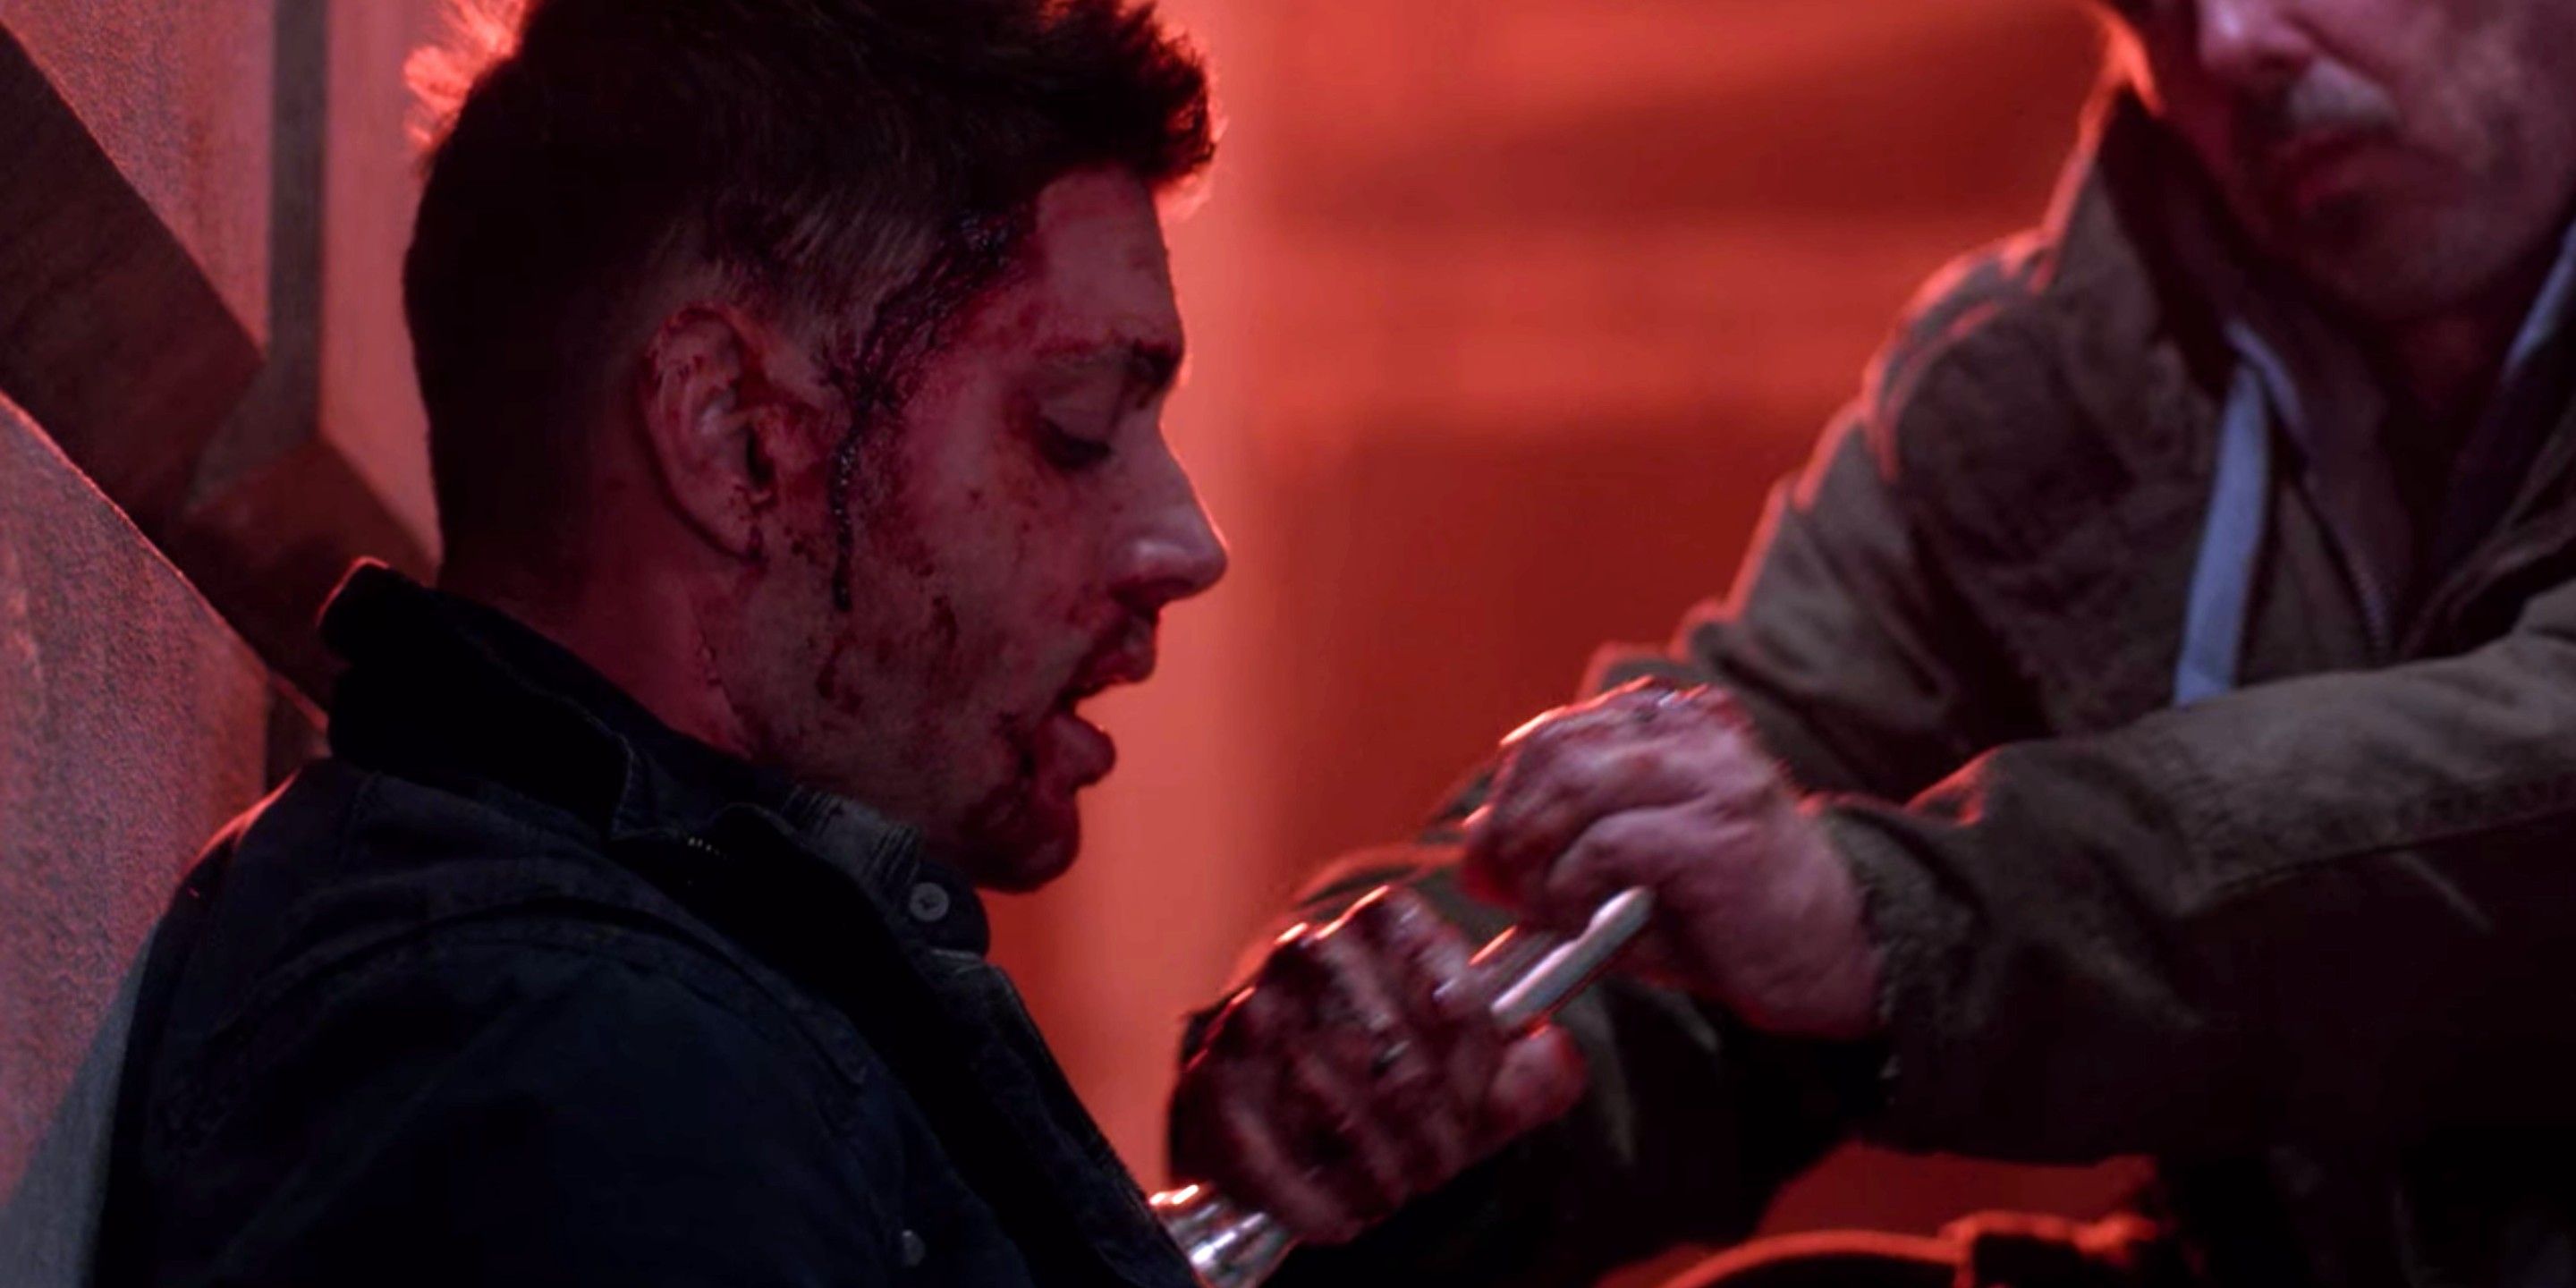 Dean gets killed by Metatron in Supernatural Do you believe in miracles